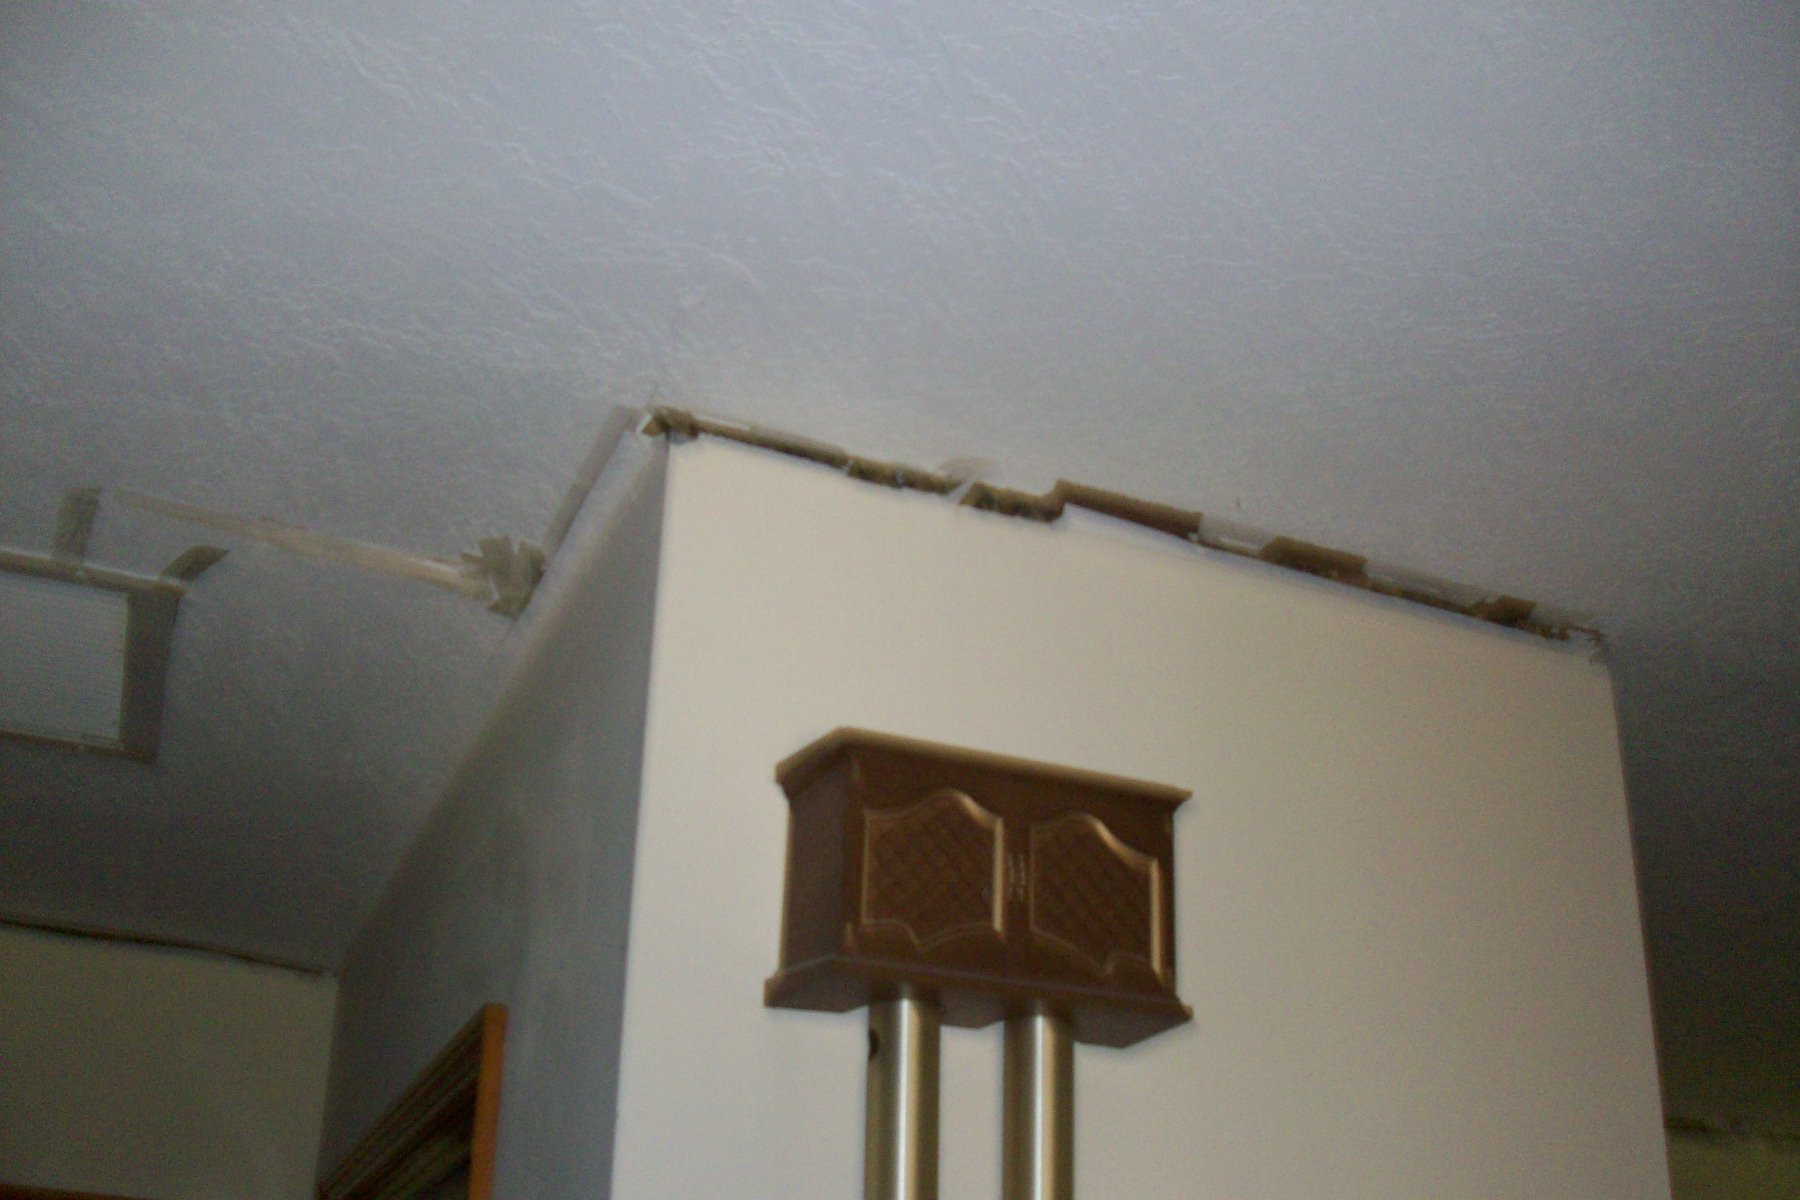 Sinkhole house Ocala. Separation along ceiling and wall.